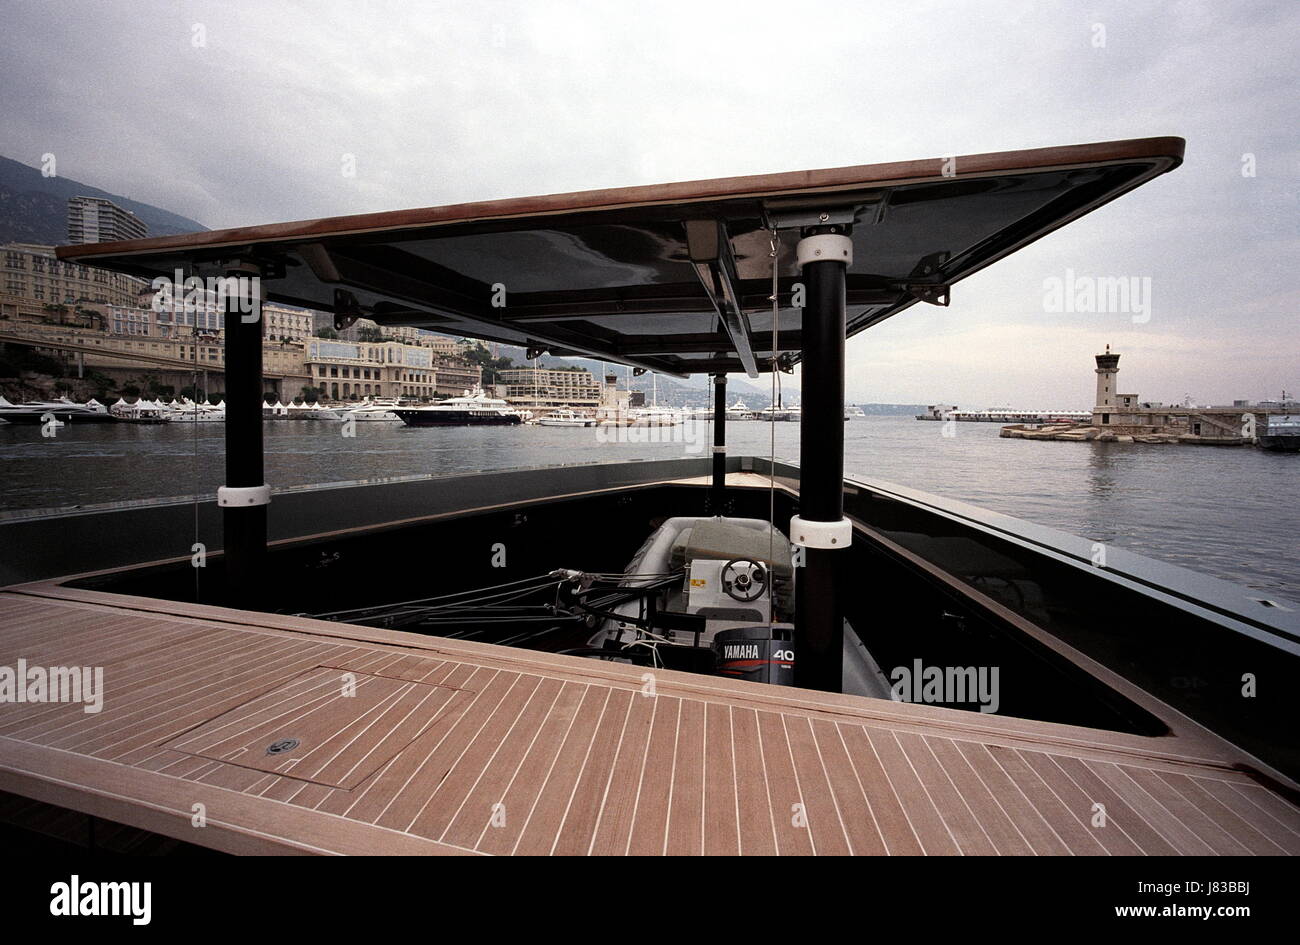 AJAXNETPHOTO. 28 SEPT 2003. MONTE CARLO, MONACO. - STEALTH BOMBER OR SUPER YACHT? - THE FRONT END OF THE NEW WALLY POWER 118 TRIPLE GAS TURBINE POWERED MOTOR YACHT.  PHOTO:JONATHAN EASTLAND/AJAX. REF:31009 5 Stock Photo